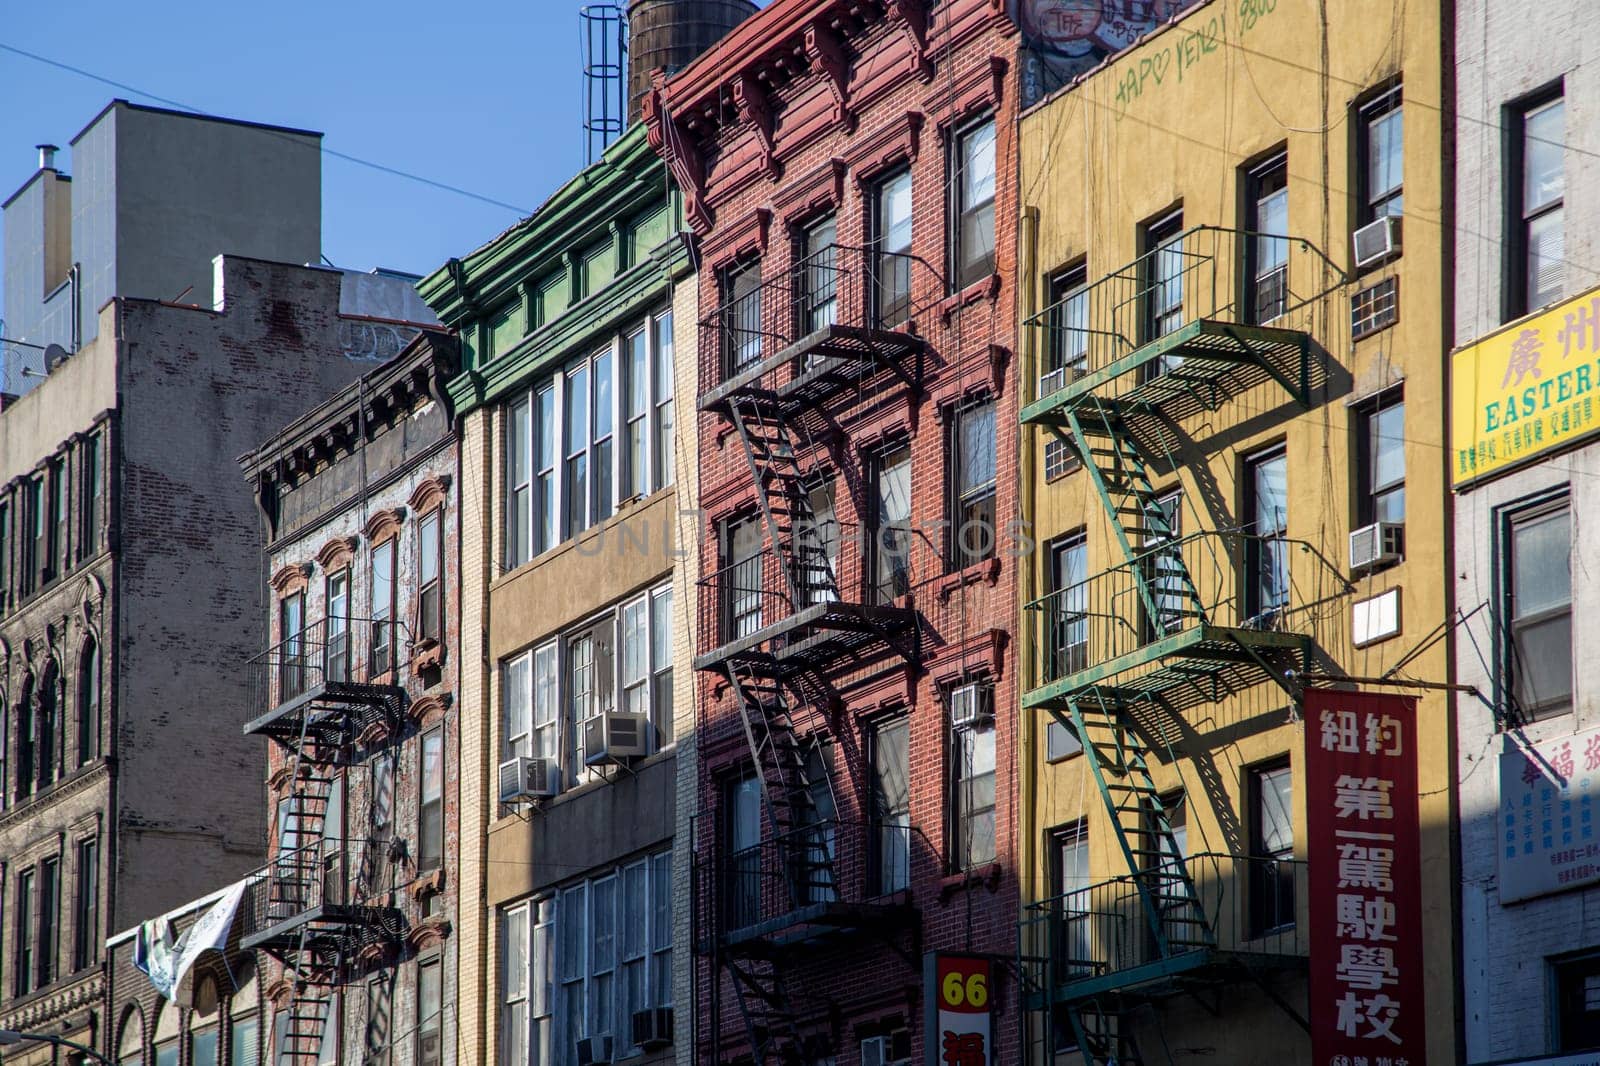 Buildings with Fire Escape in Chinatown, NYC by oliverfoerstner